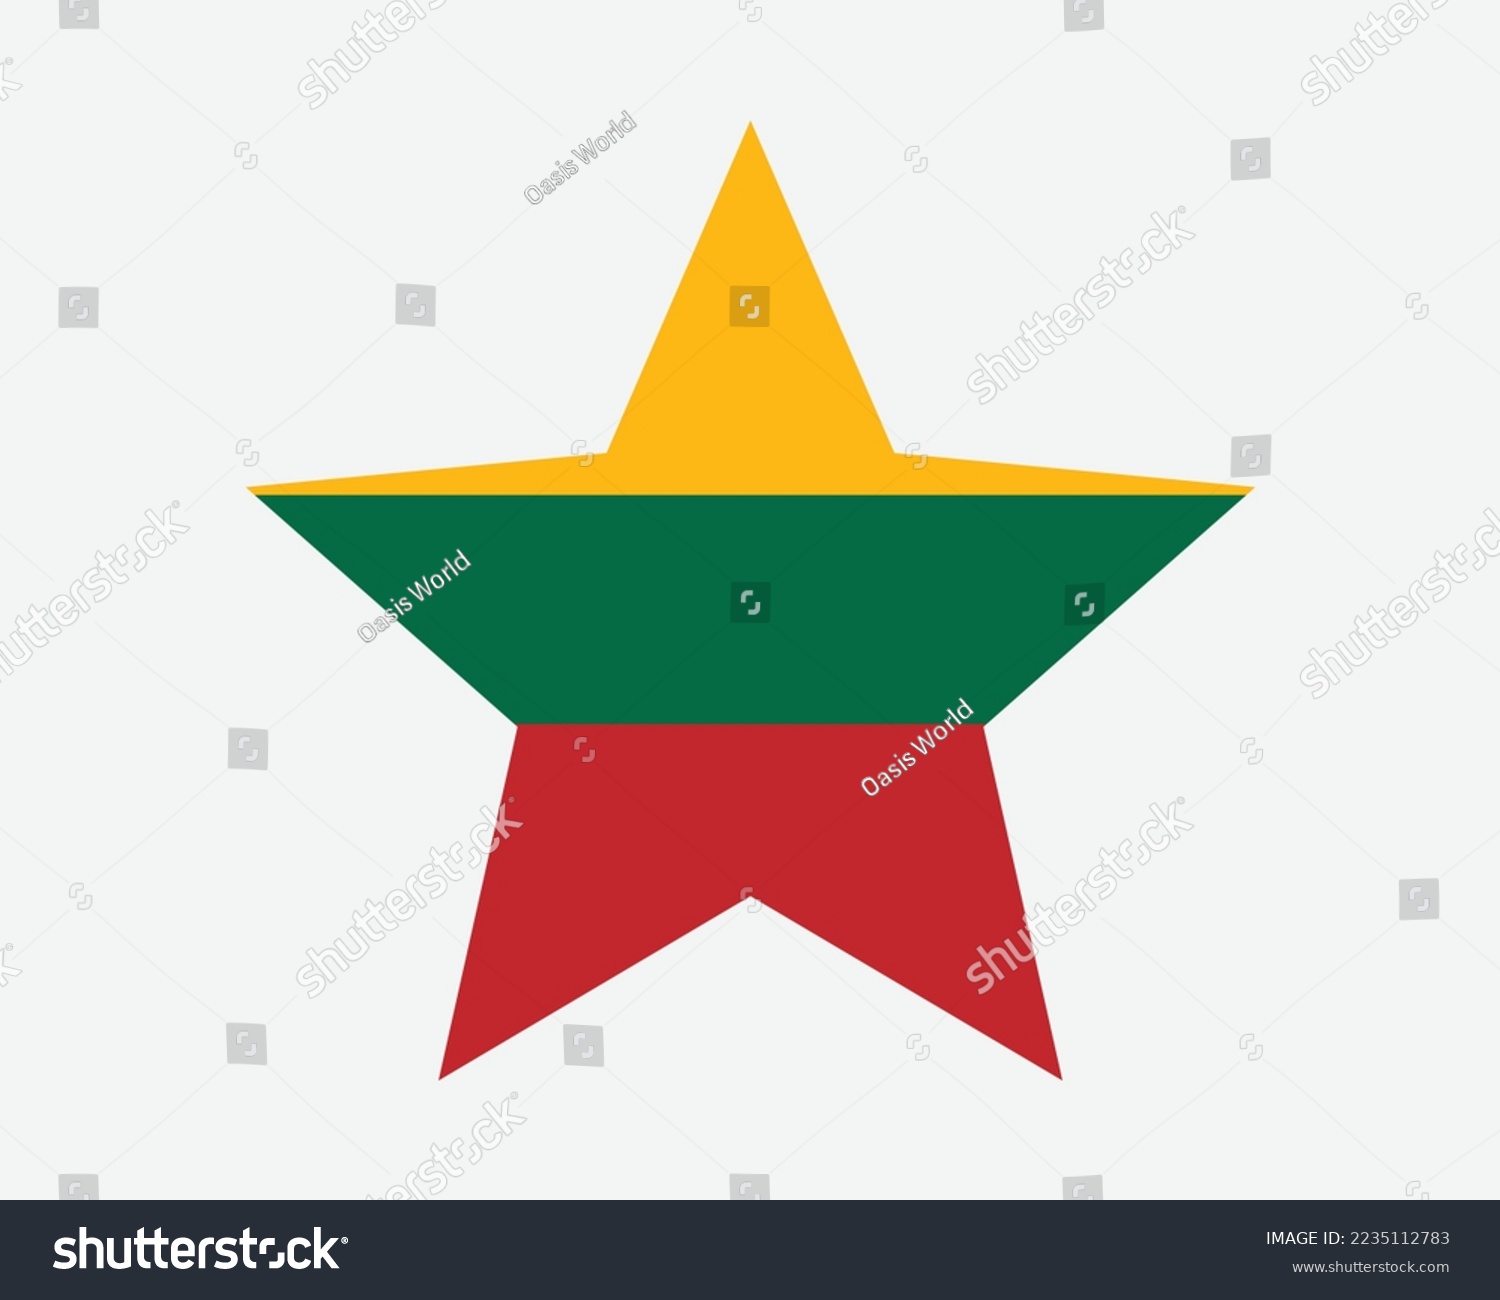 SVG of Lithuania Star Flag. Lithuanian Star Shape Flag. Republic of Lithuania Country National Banner Icon Symbol Vector Flat Artwork Graphic Illustration svg